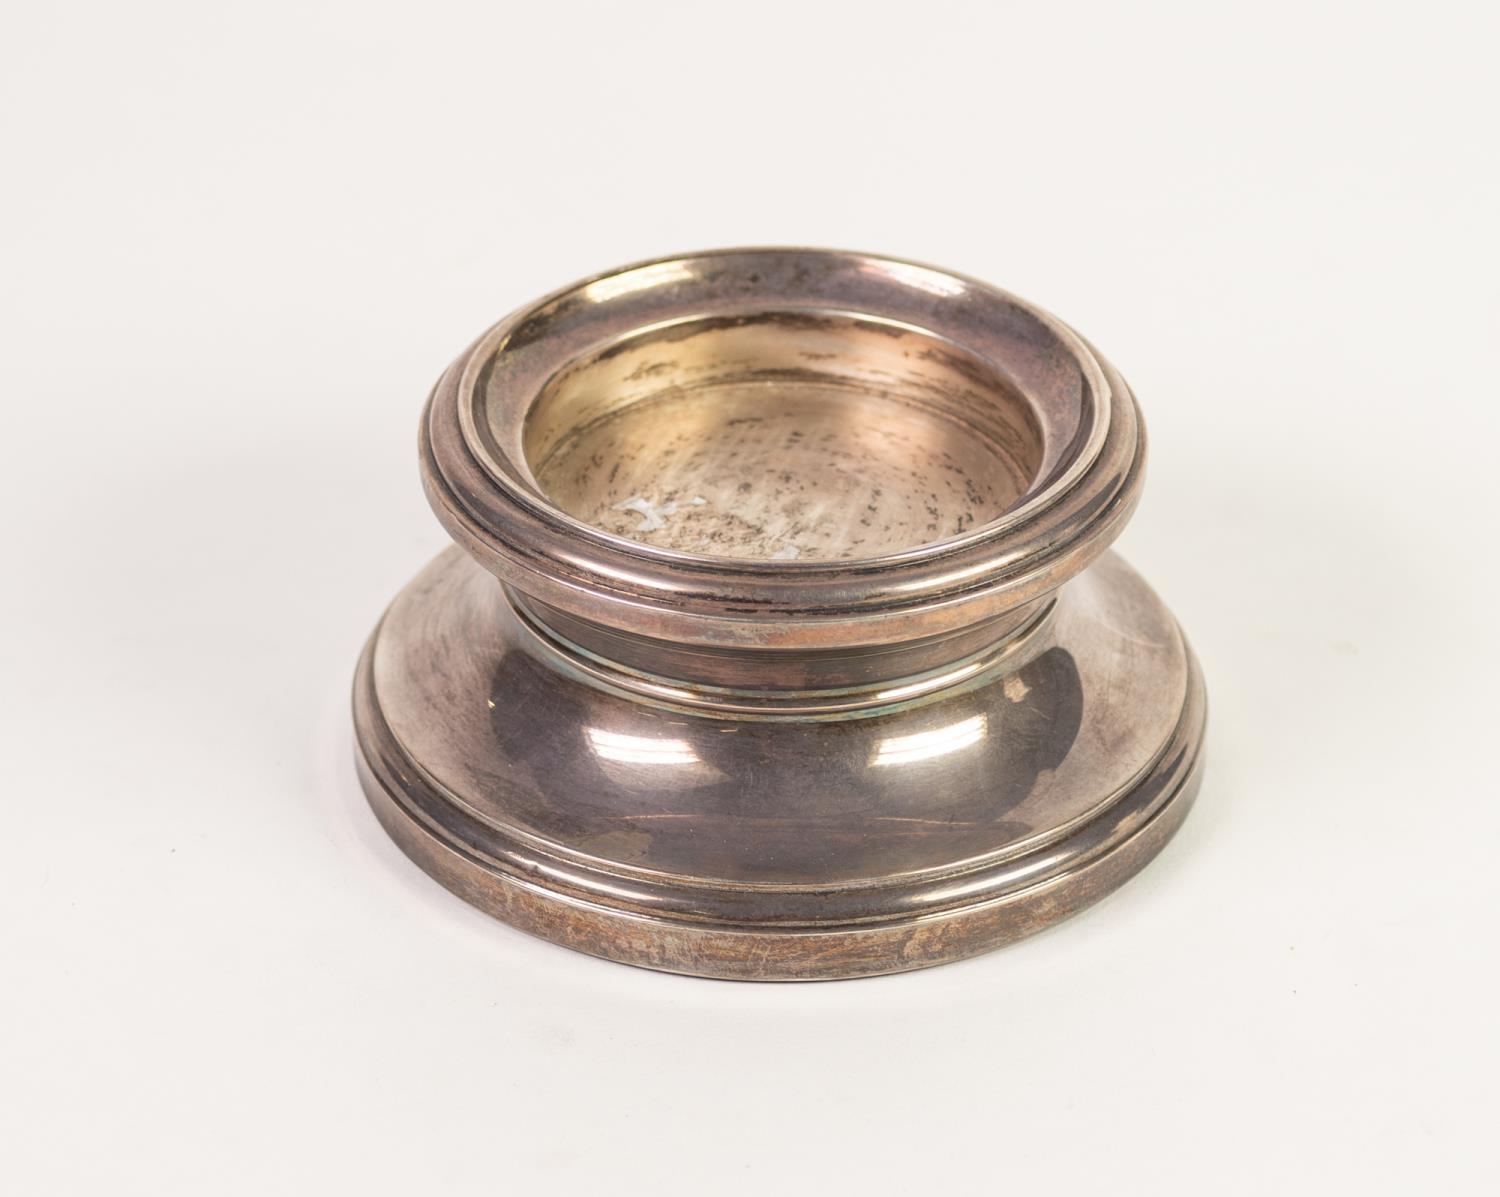 * IRISH SILVER WAISTED CIRCULAR BASE OR PEDESTAL probably to support 3in (7.6cm) diameter bottle